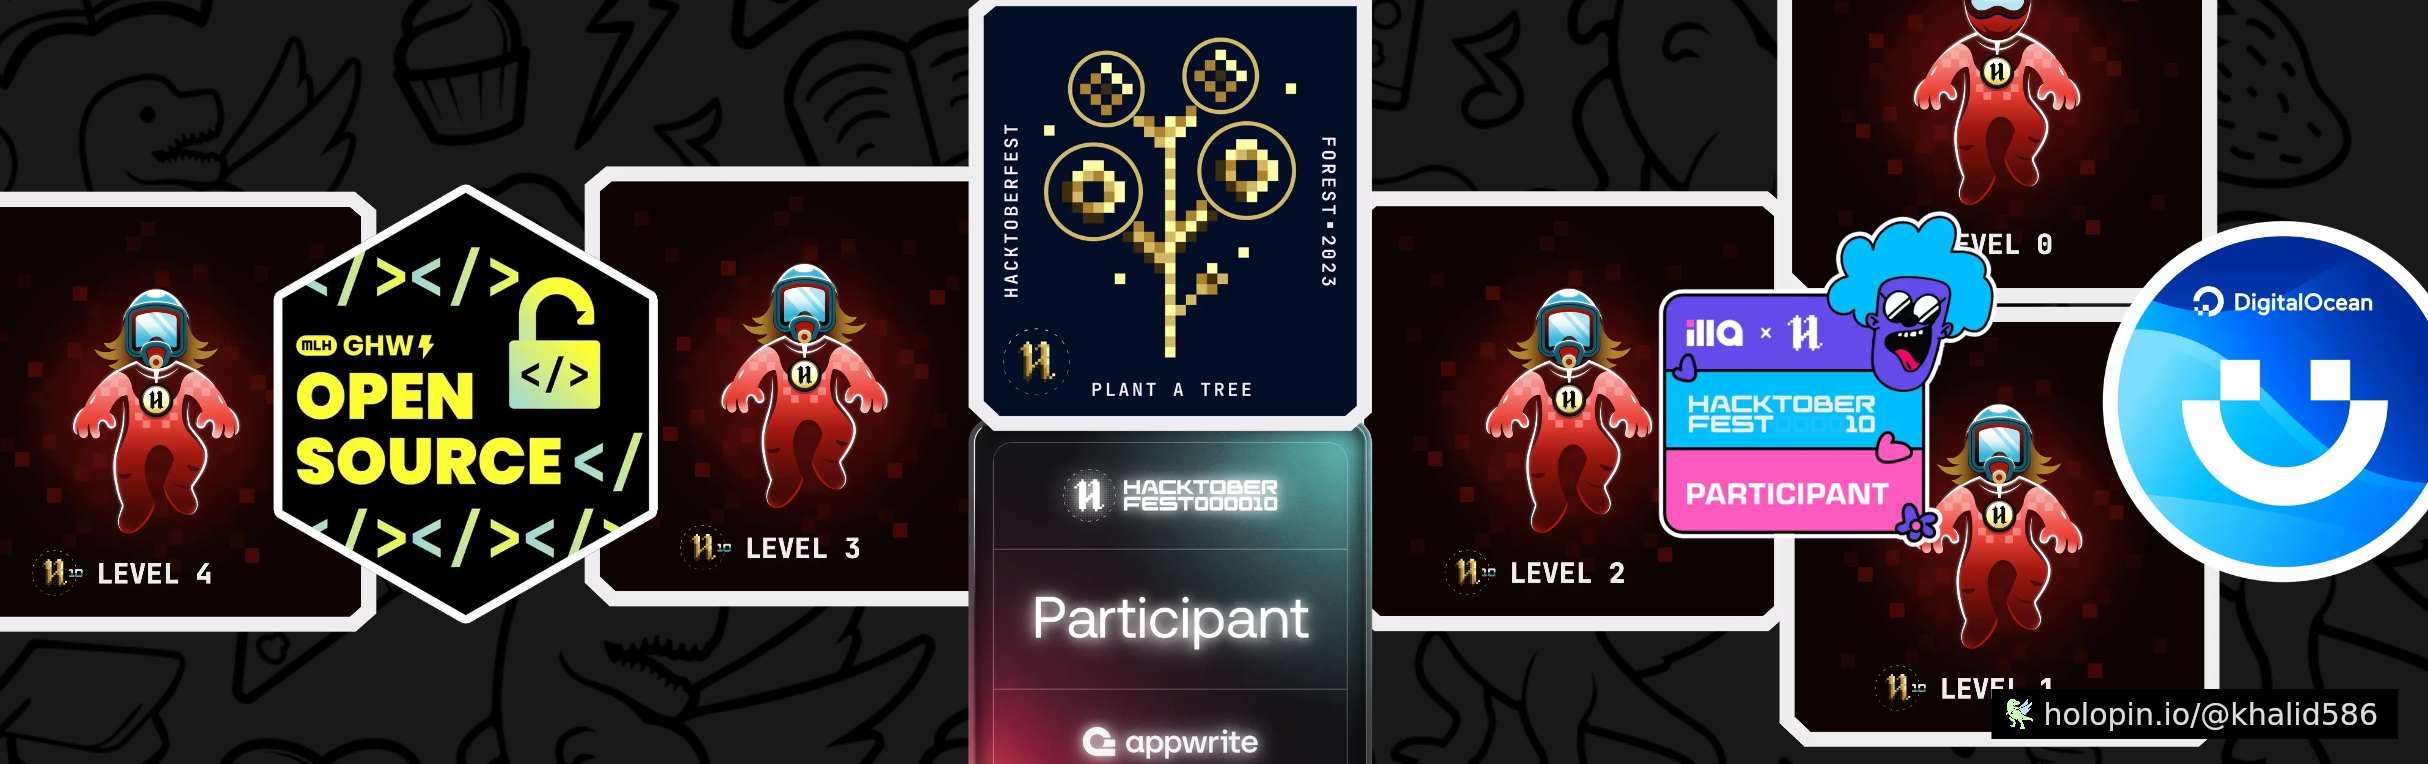 An image of @khalid586's Holopin badges, which is a link to view their full Holopin profile